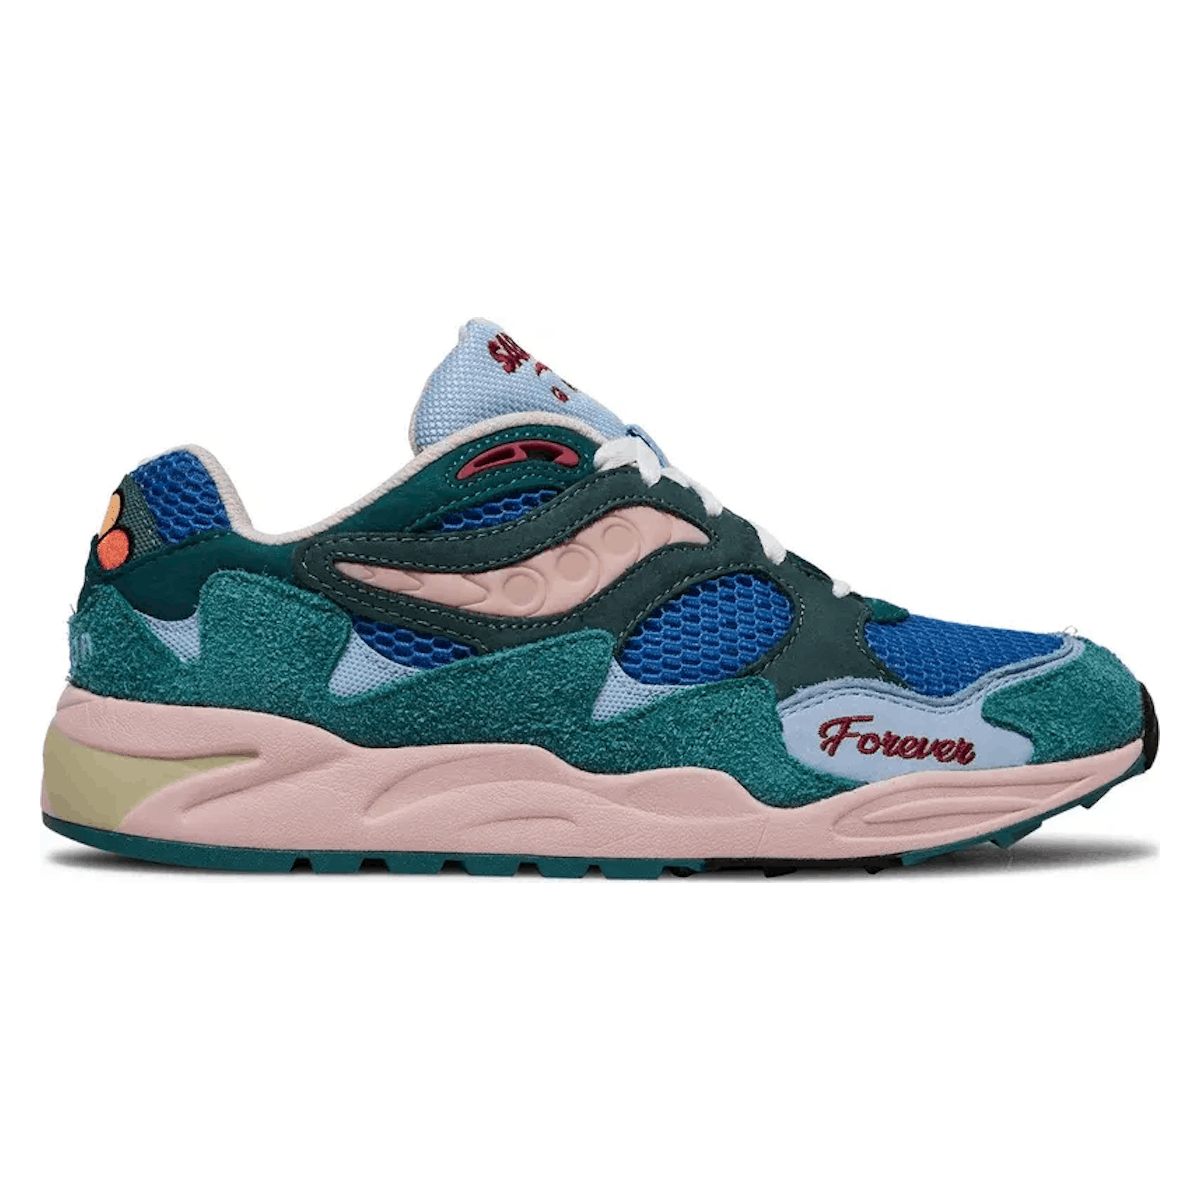 Jae Tips x Saucony Grid Shadow 2 "What's the Occasion? - Wear To A Date"